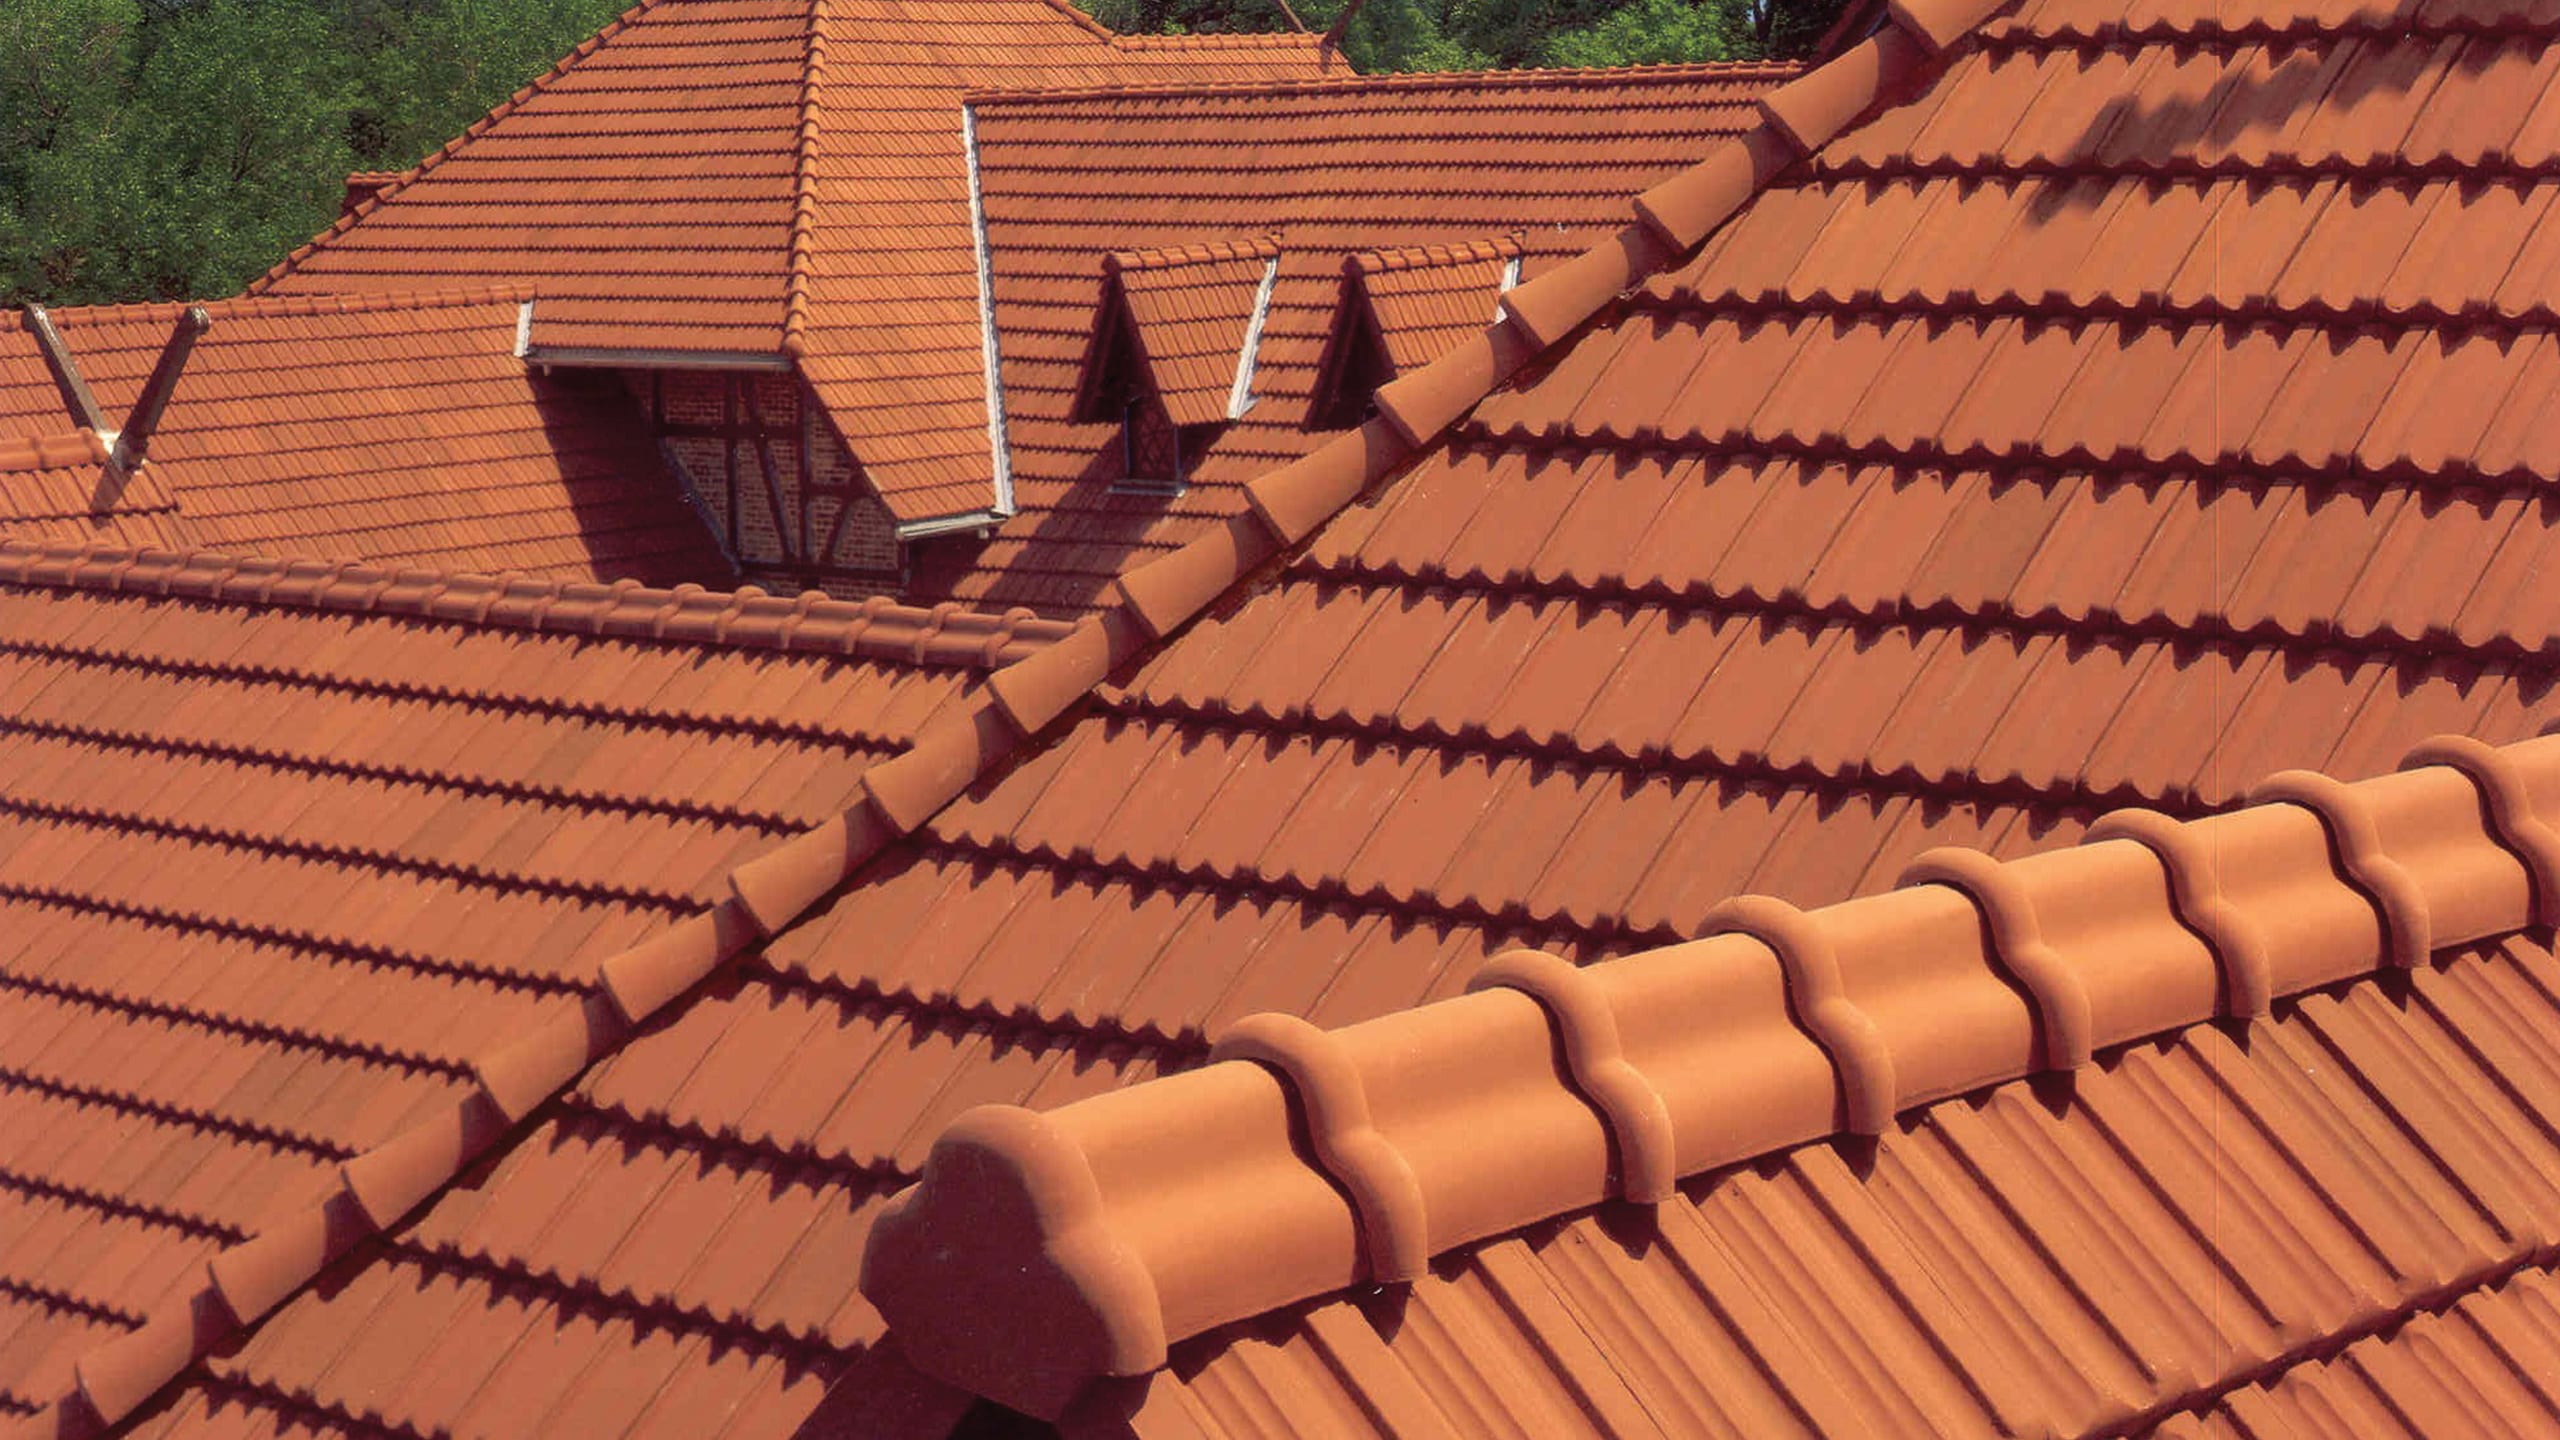 Humboldt Park Stables Featuring Ludowici French Clay Roof Tile